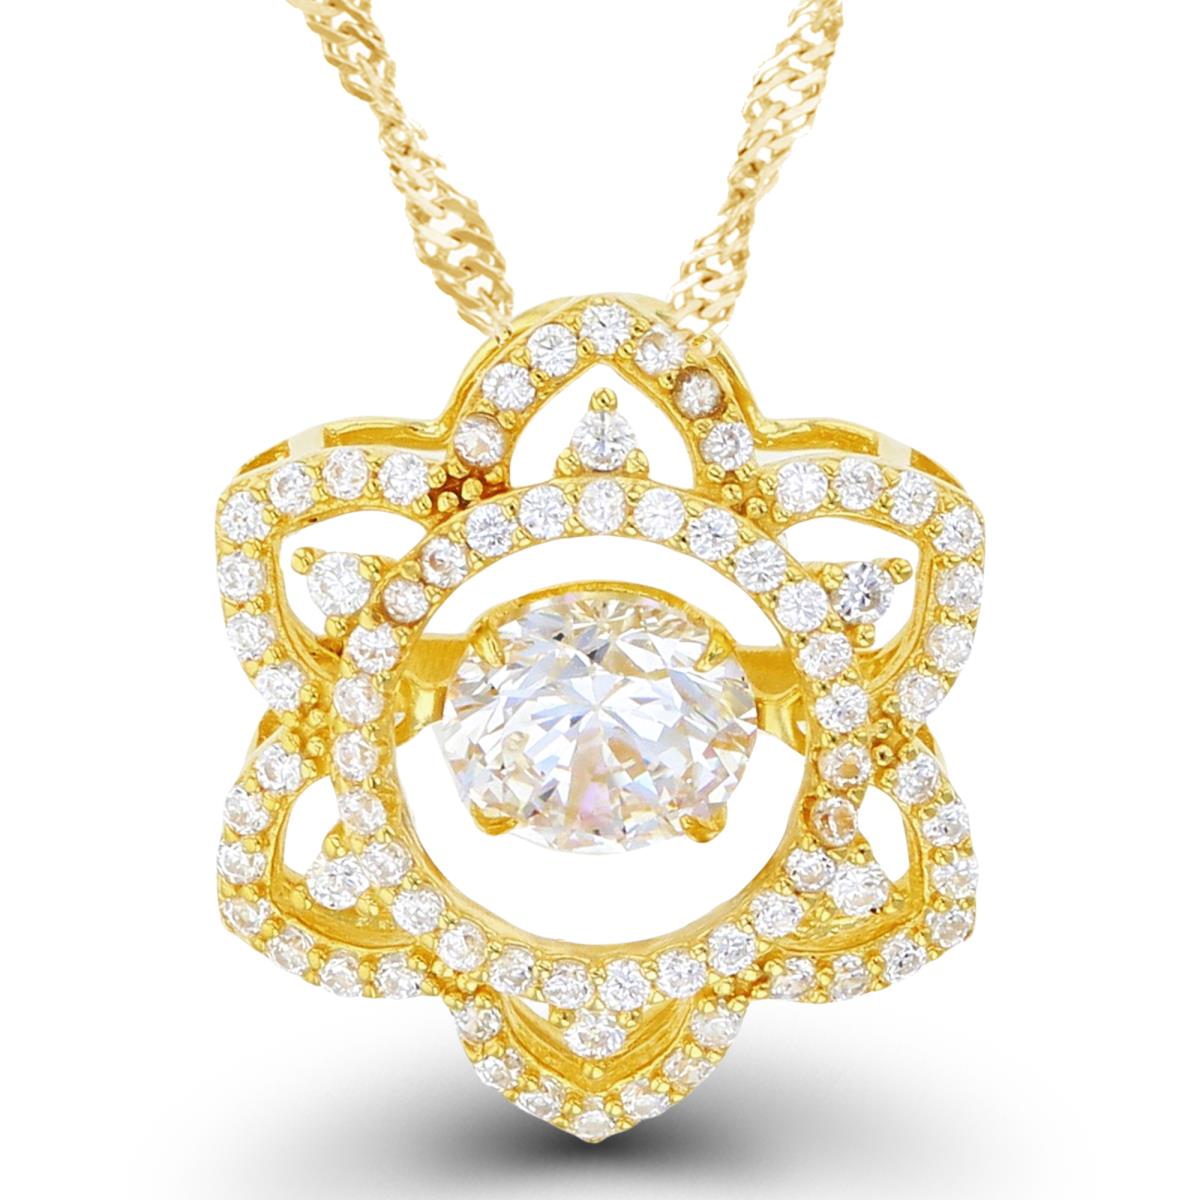 Sterling Silver+1Micron Yellow Gold 6mm Rnd White CZ Dancing in Flower 18"+2" Singapore Necklace